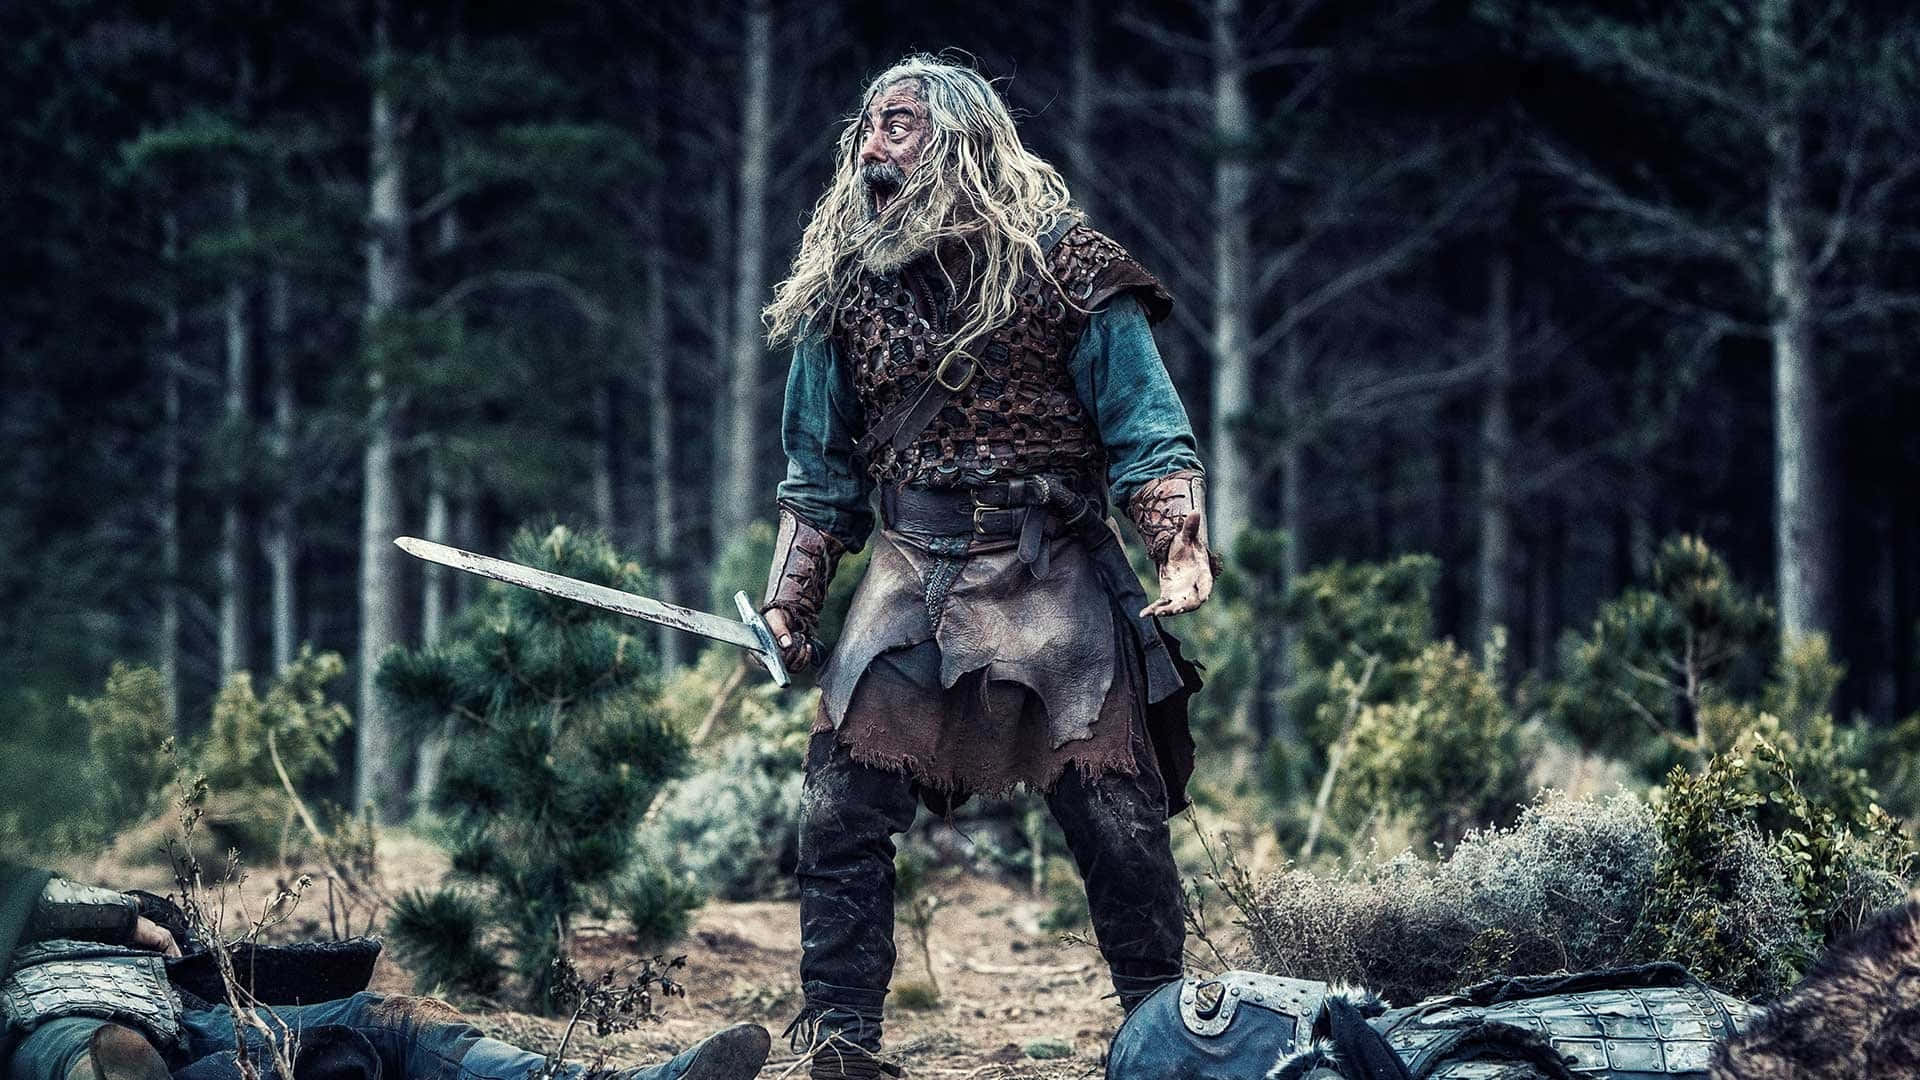 A Viking with sword in hand ready to face the fierce battle